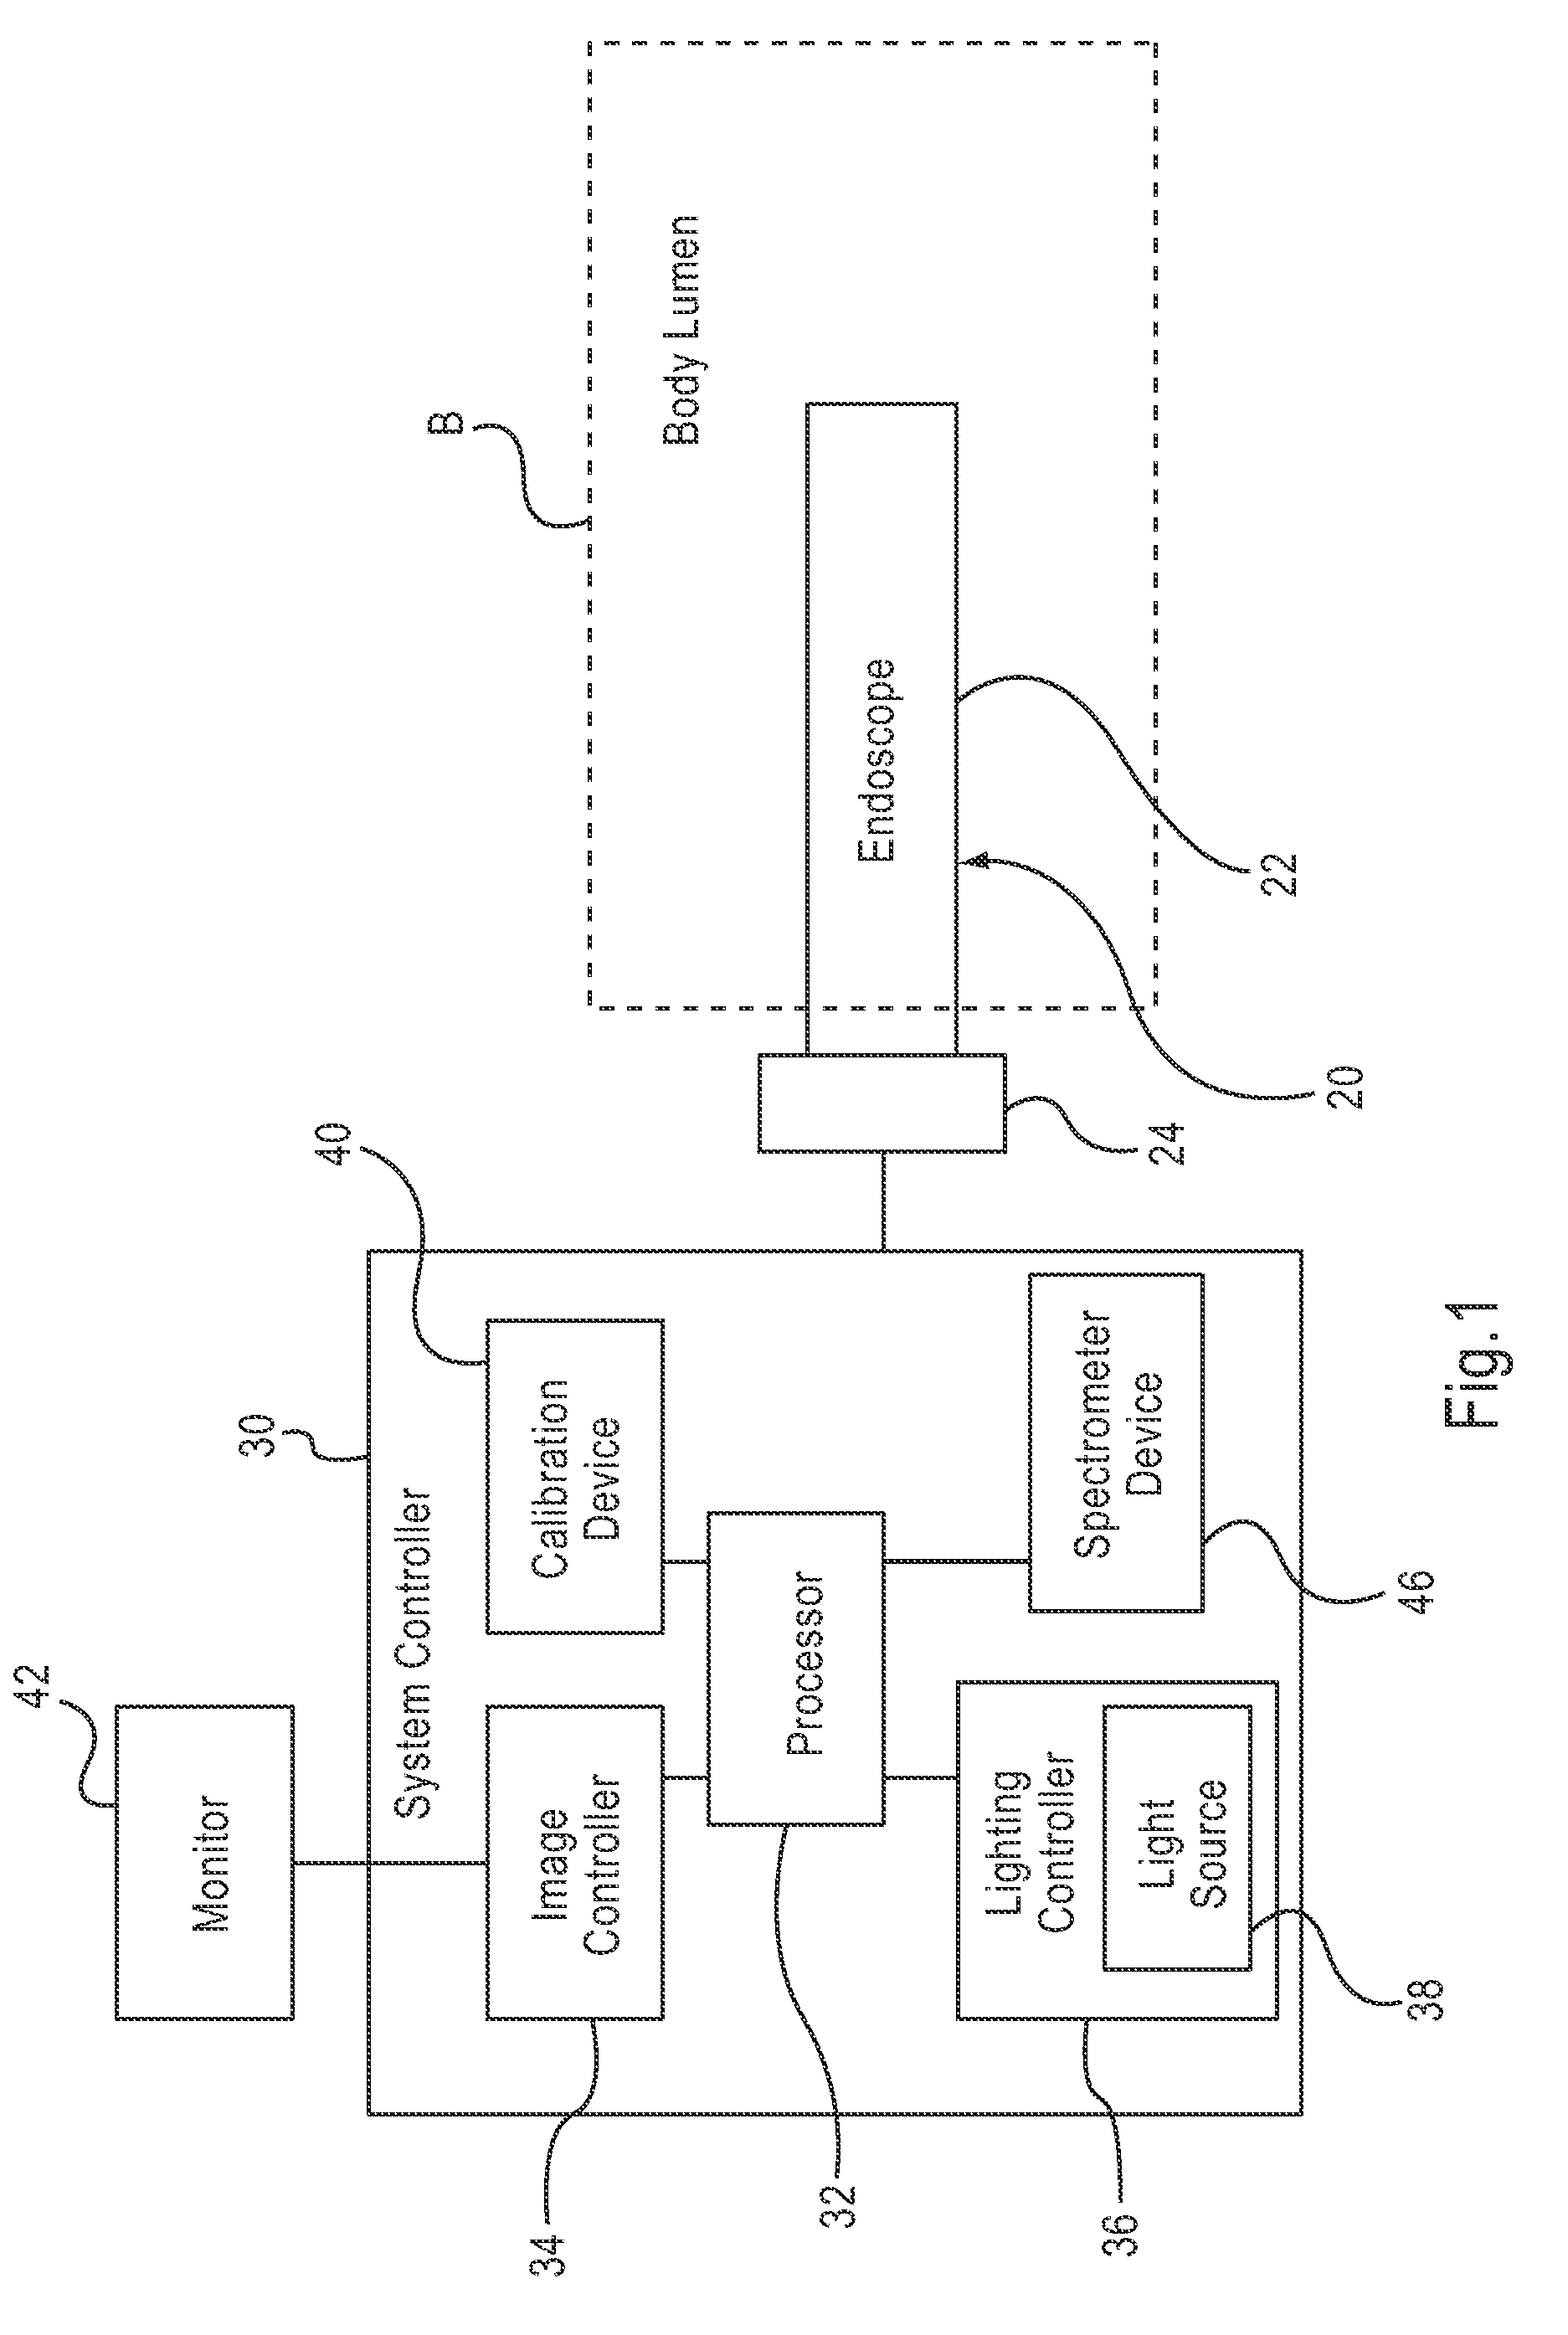 System and methods for the improvement of images generated by fiberoptic imaging bundles